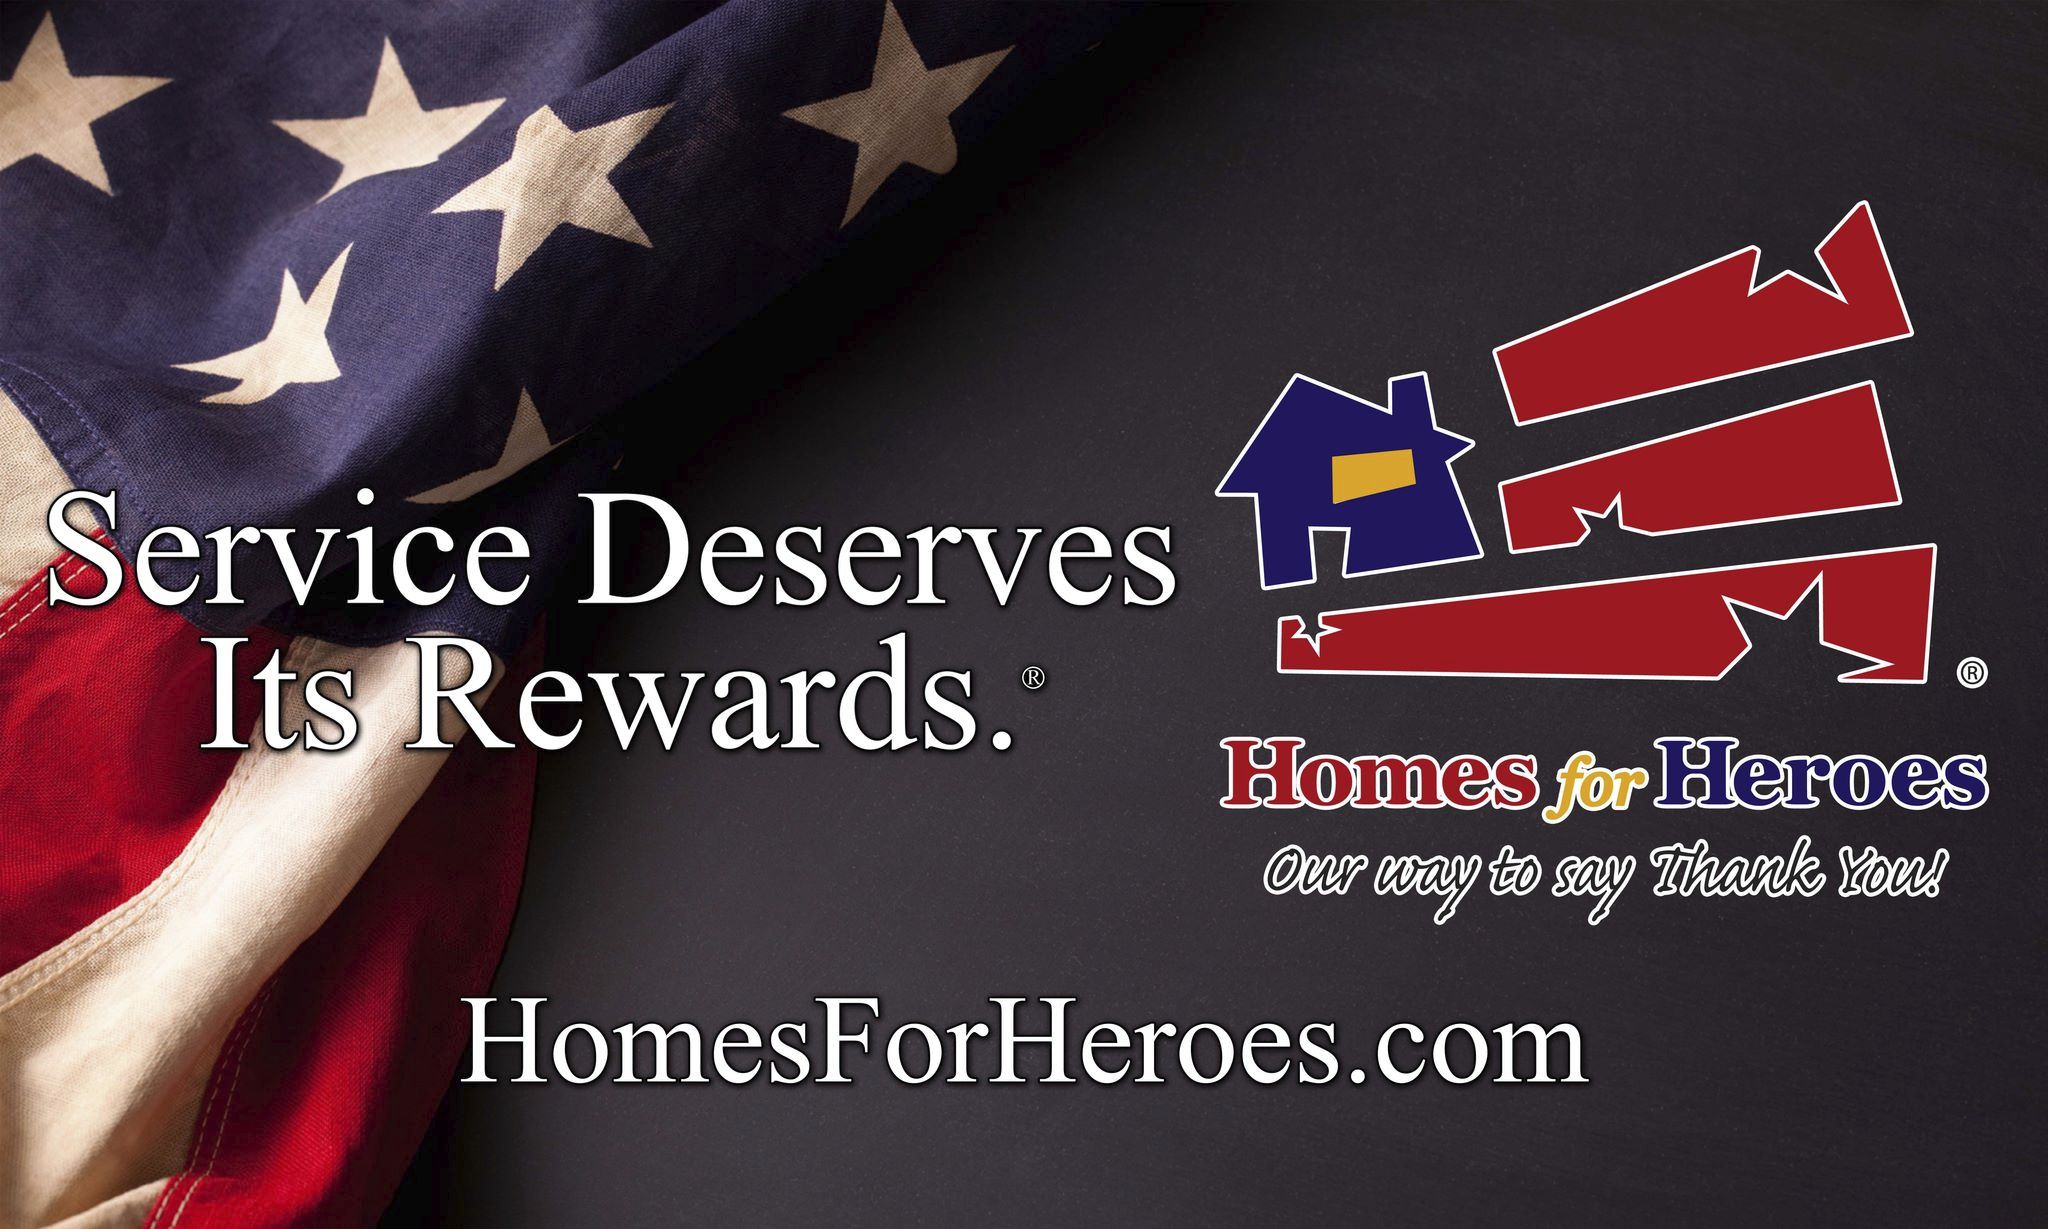 What is Homes For Heroes?